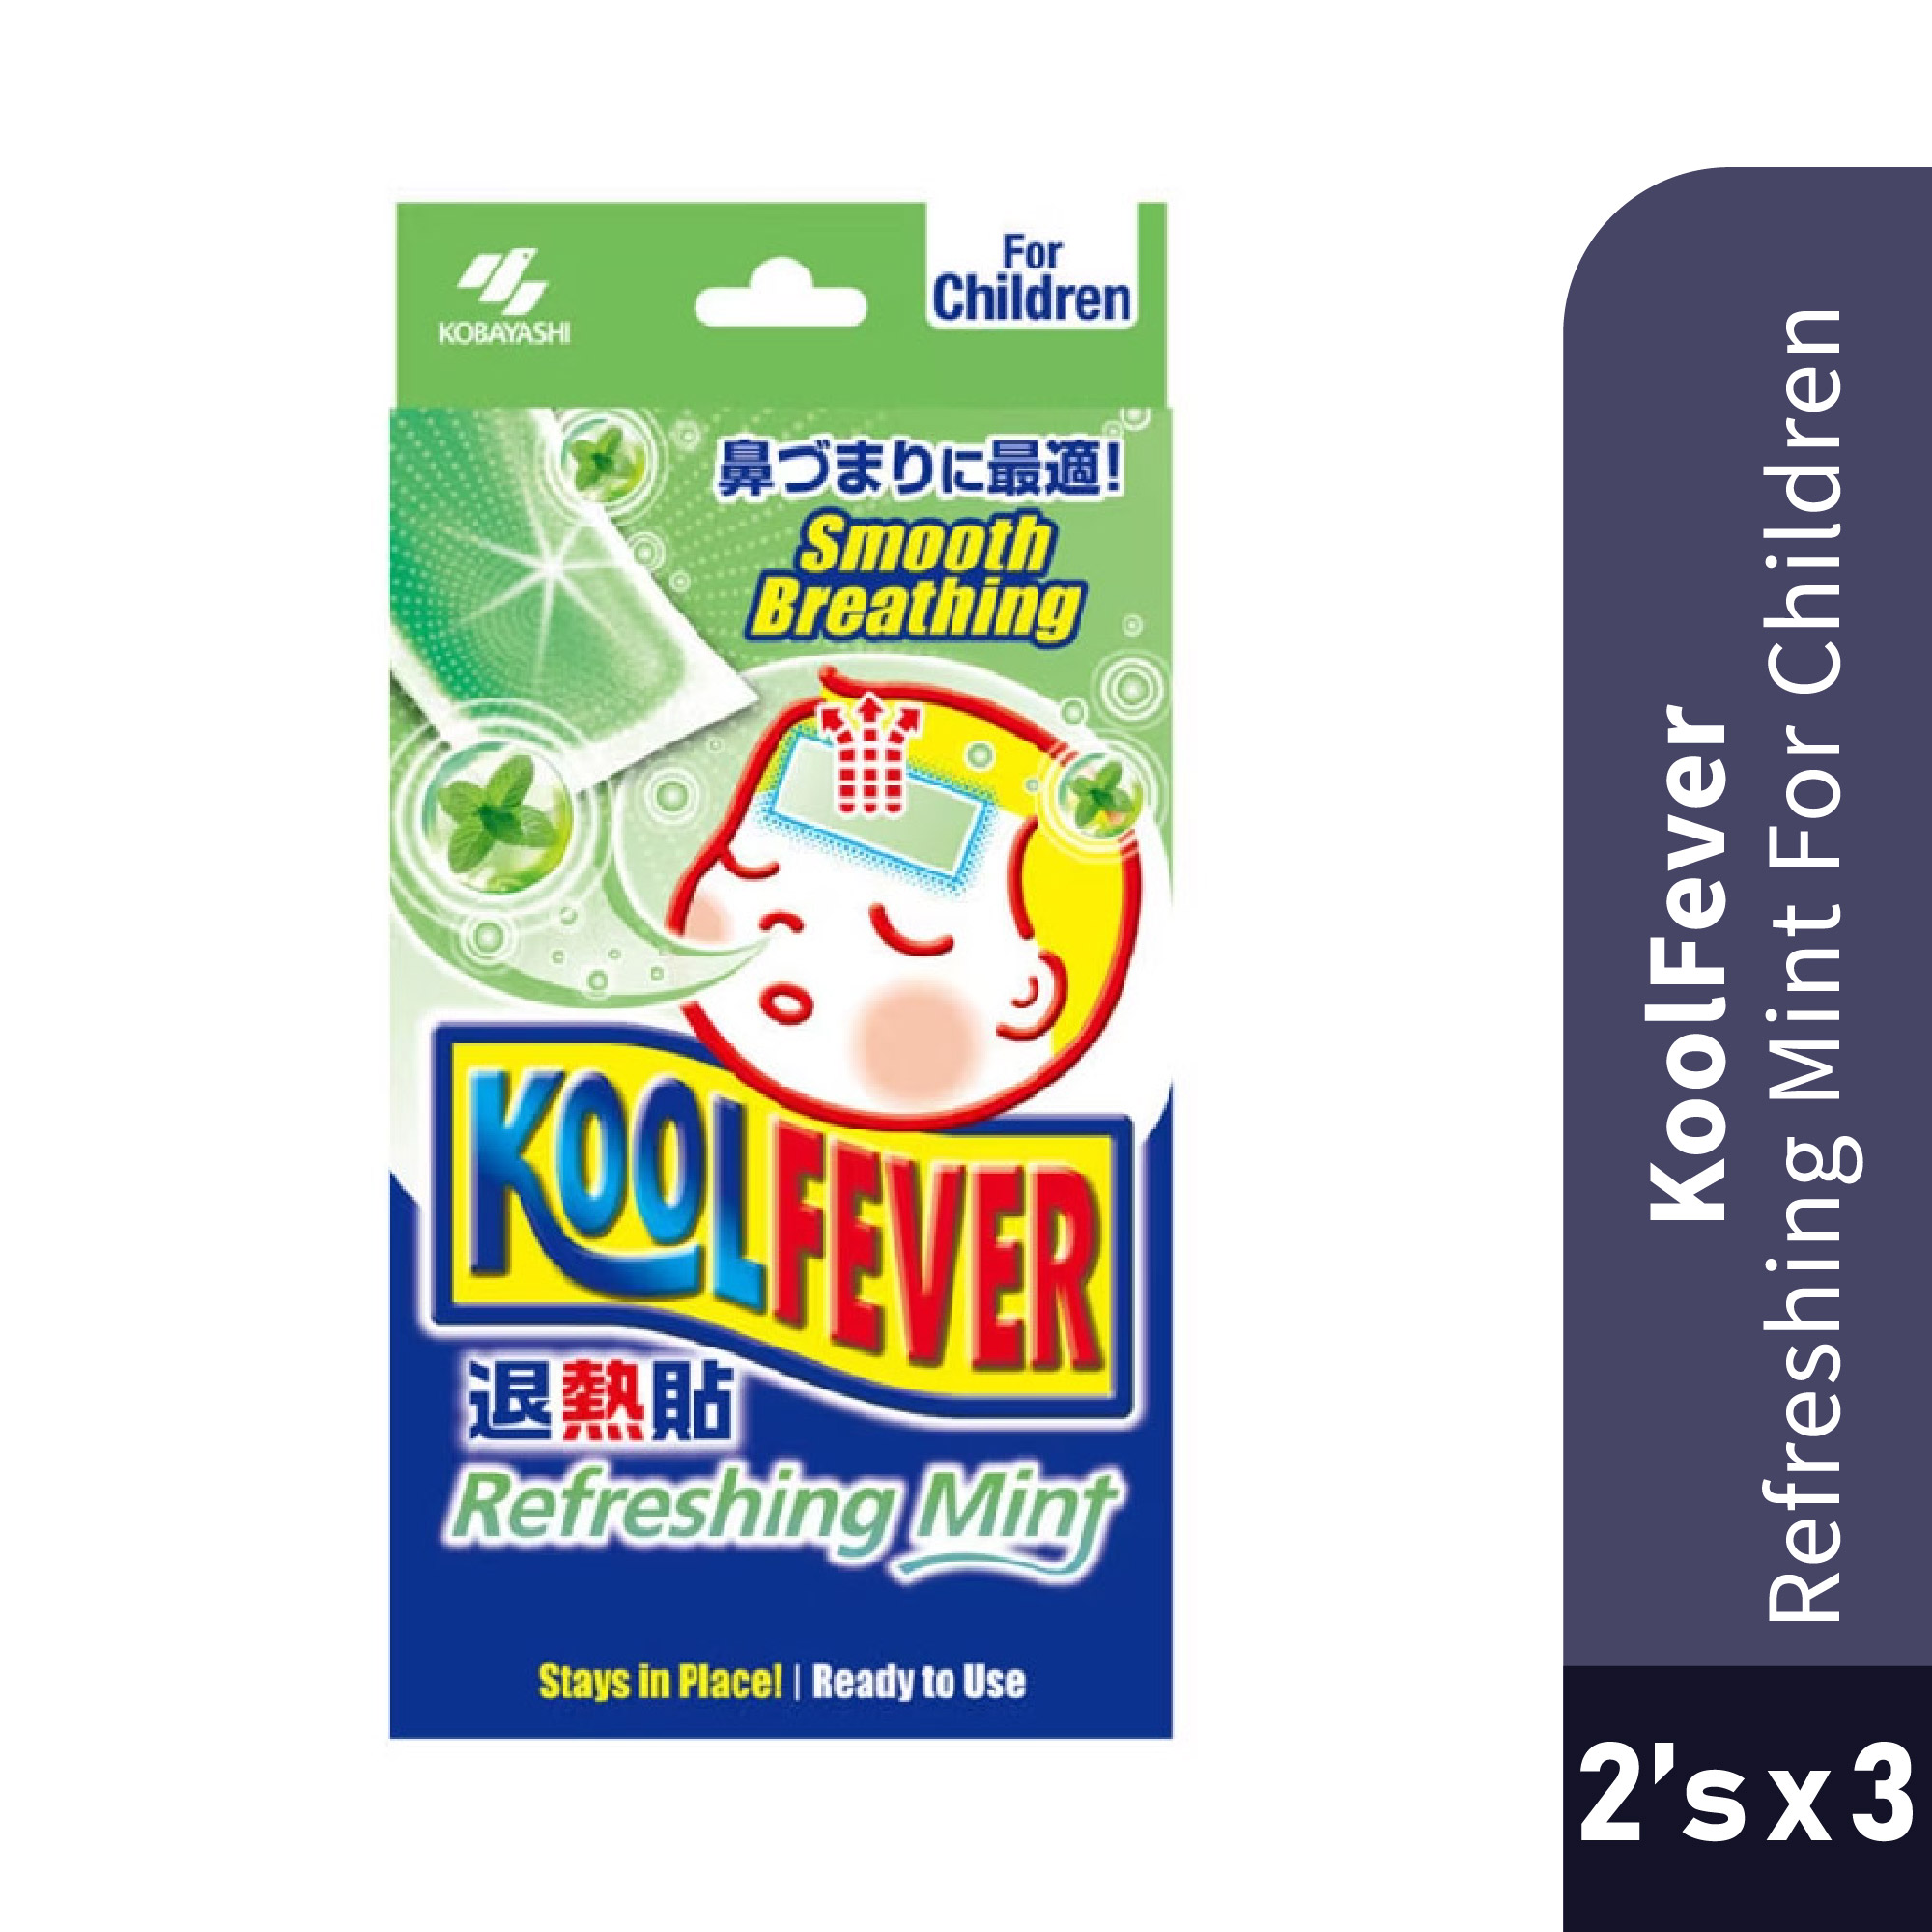 KOOLFEVER Refreshing Mint 6's for Kids, Cool Fever for Fever, Kool Fever with Cooling Effect, Cool Temperature, 退热贴